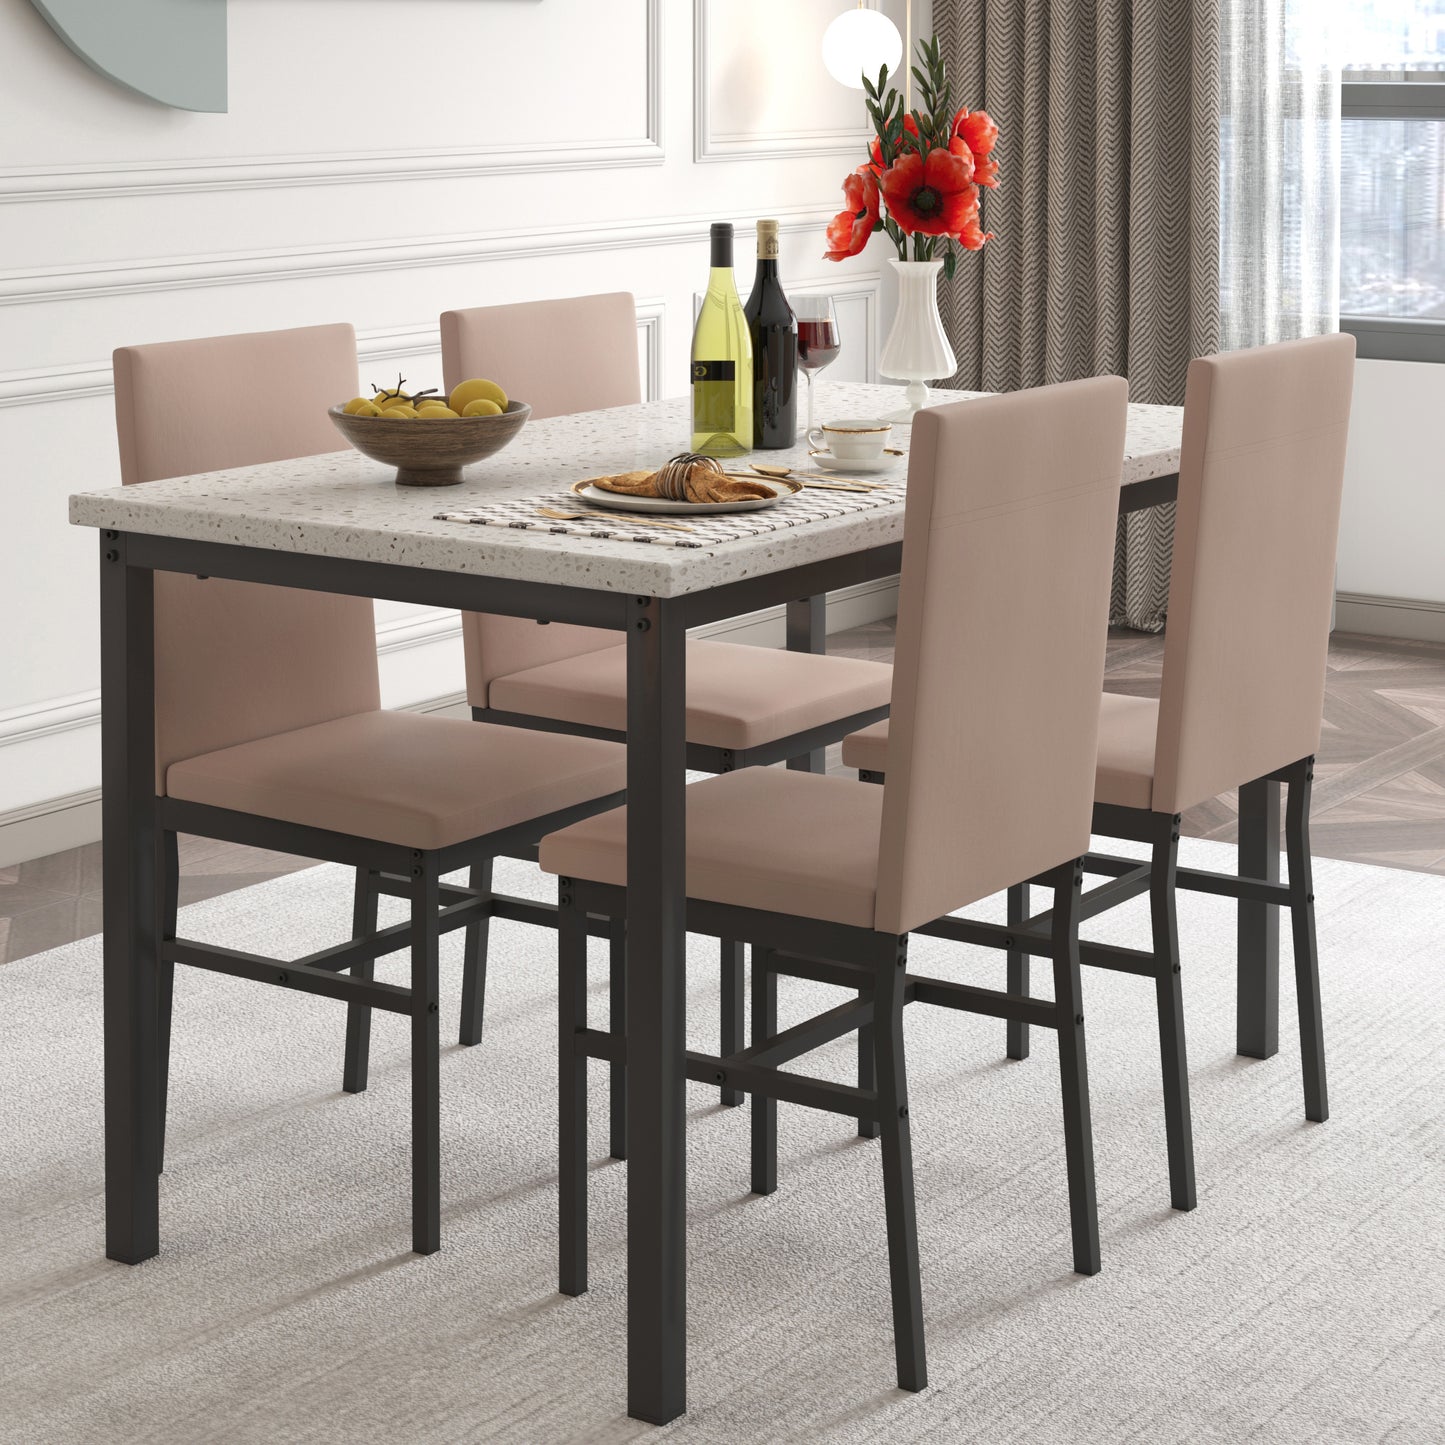 SYNGAR 7 Piece Dining Set, Modern Dining Table and Chairs Set for 6, Kitchen Dining Table Set with Faux Marble Tabletop and 4 PU Leather Upholstered Chairs, for Small Space, Breakfast Nook, D9212